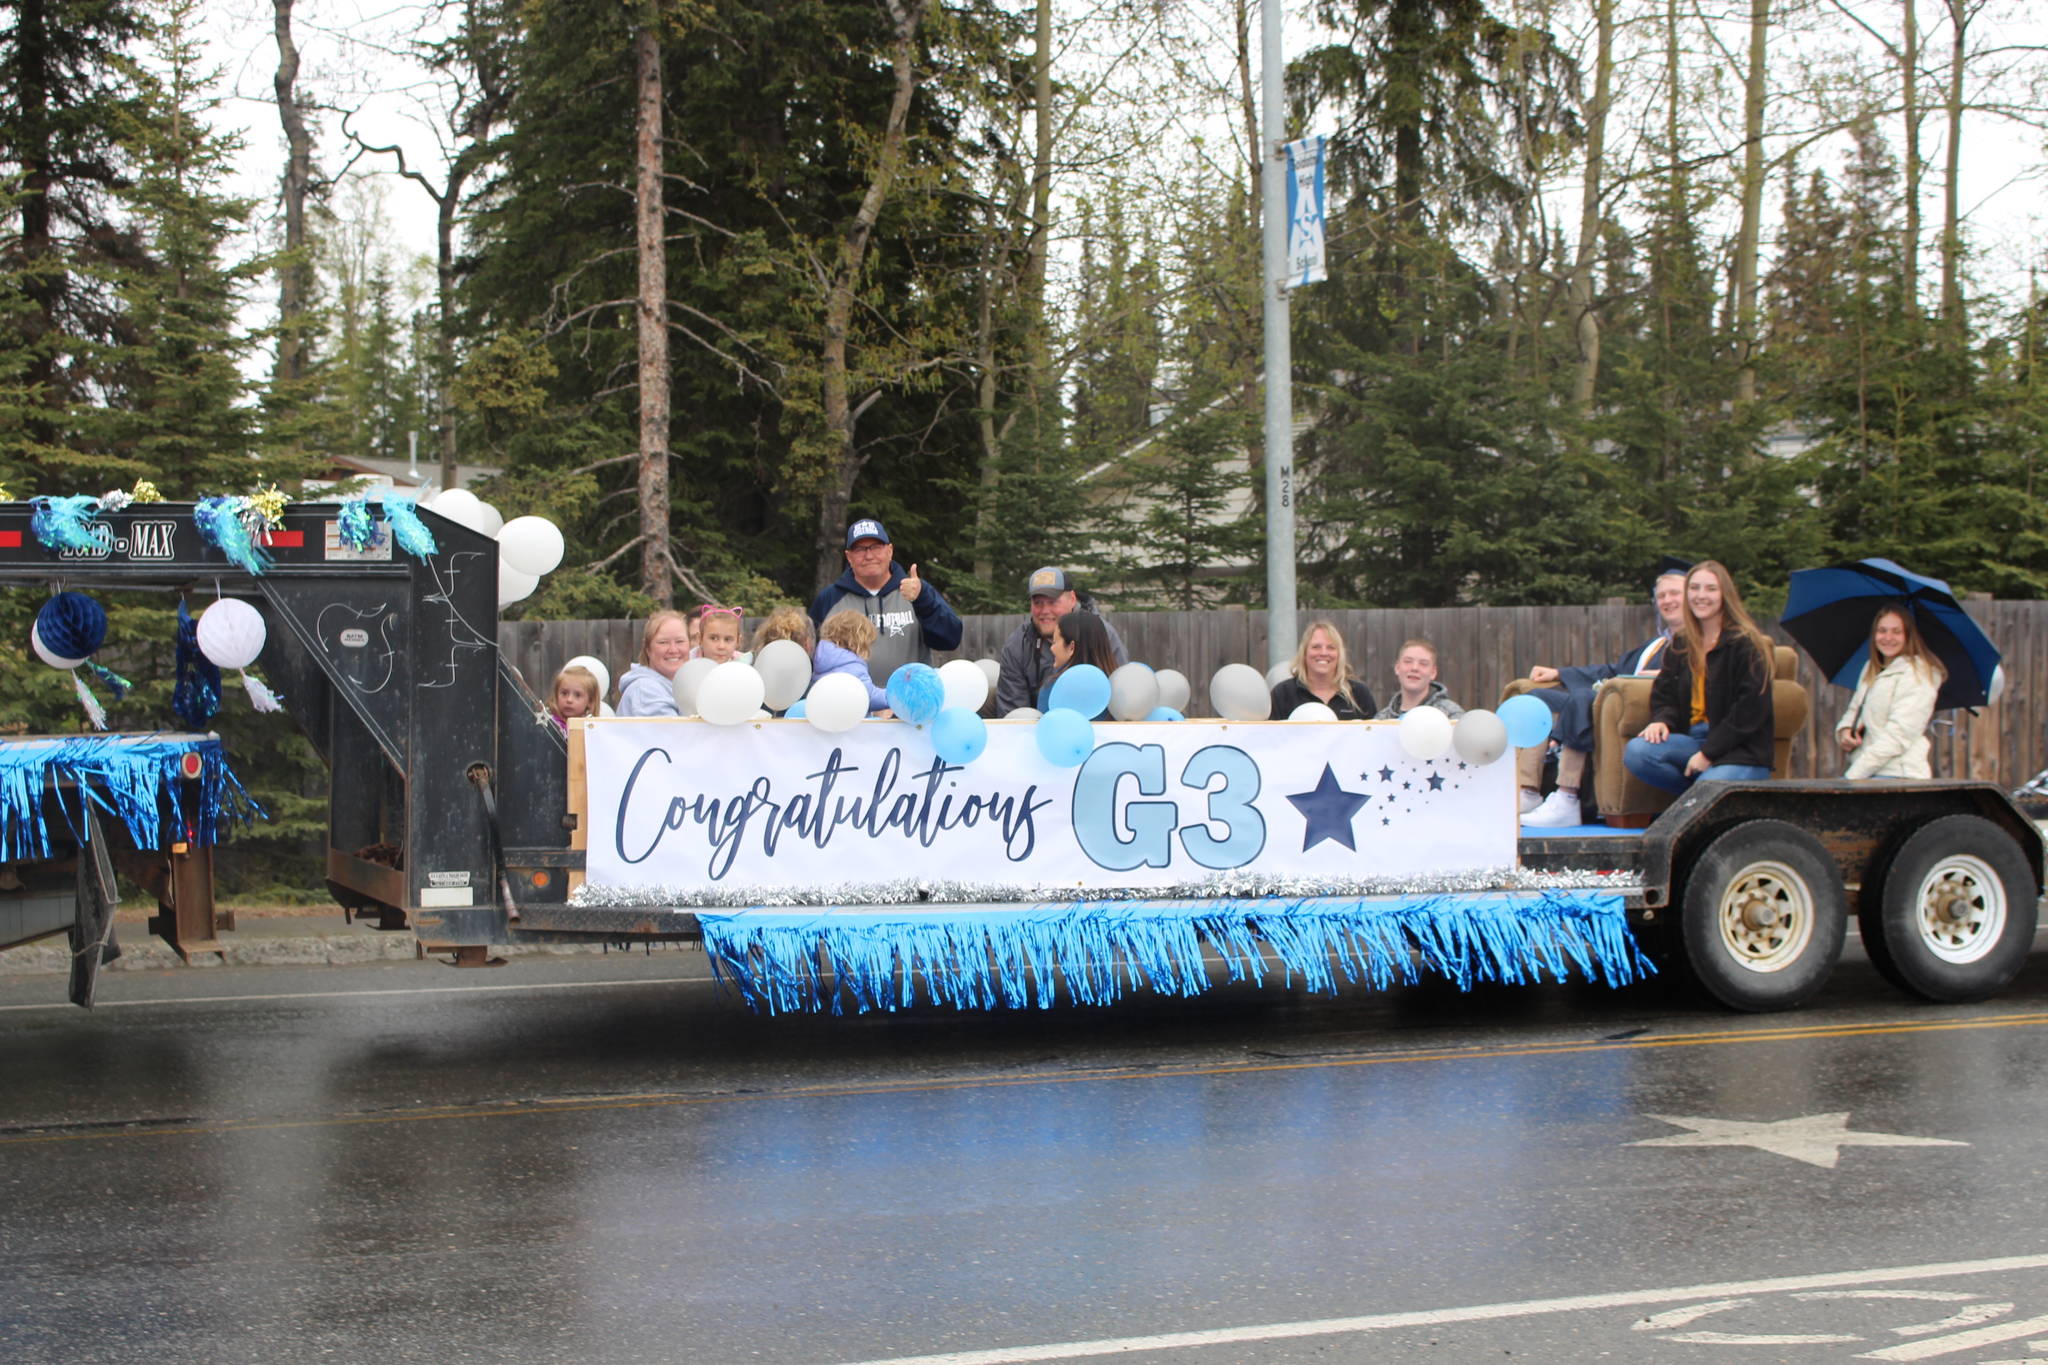 A float celebrating Galen Brantley III, aka “G3”, is seen here in Soldotna, Alaska during Soldotna High School’s 2020 graduation on May 18, 2020. (Photo by Brian Mazurek/Peninsula Clarion)                                A float celebrating Galen Brantley III, aka “G3”, is seen here in Soldotna, Alaska during Soldotna High School’s 2020 graduation on May 18, 2020. (Photo by Brian Mazurek/Peninsula Clarion)